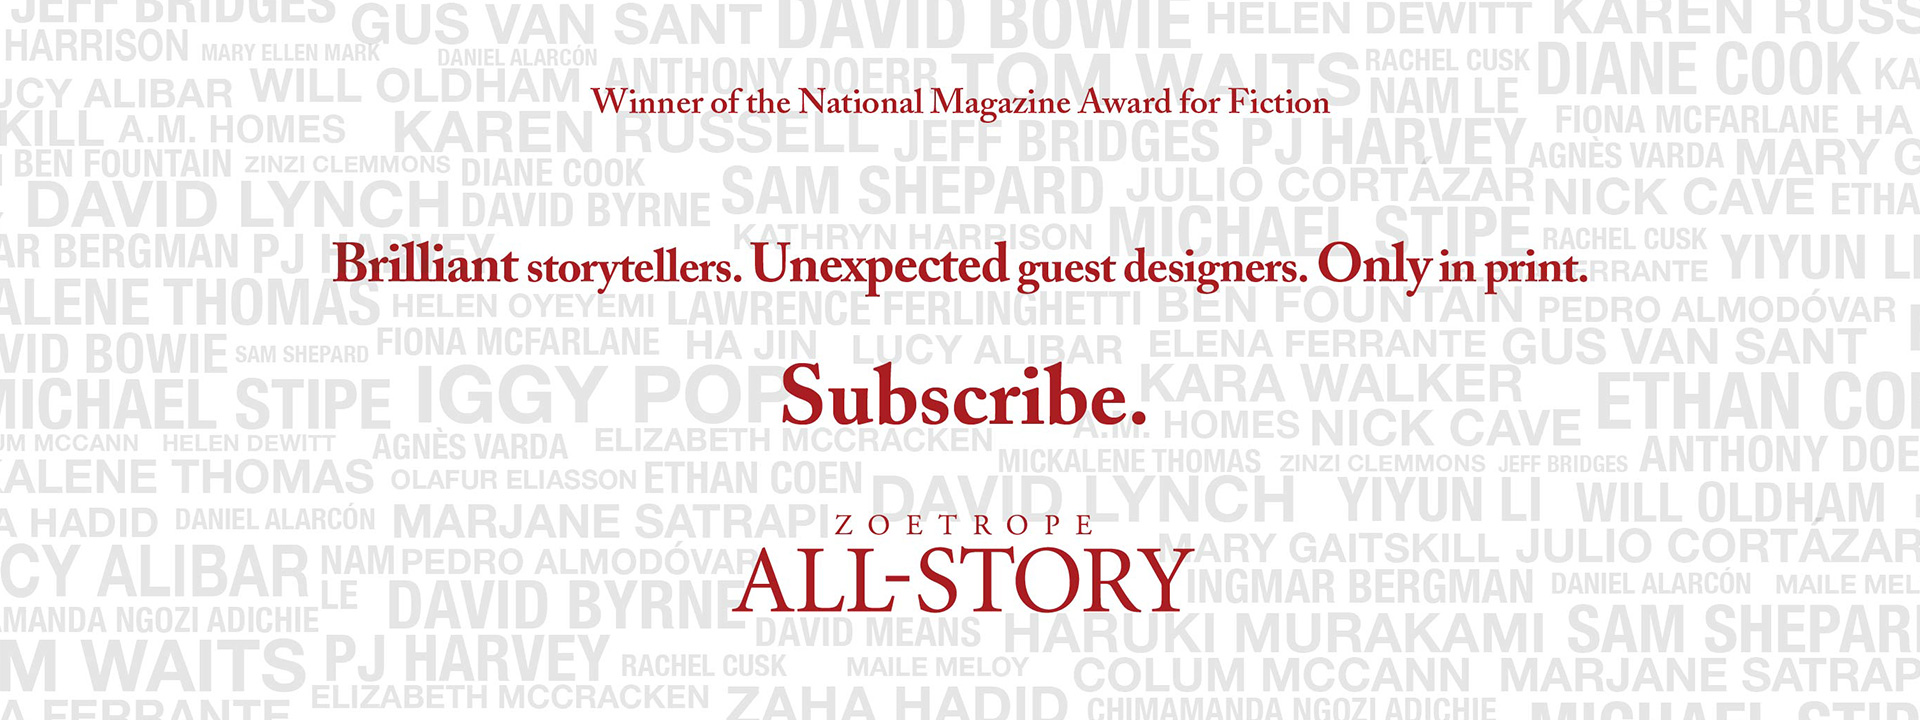 Subscribe to all-story